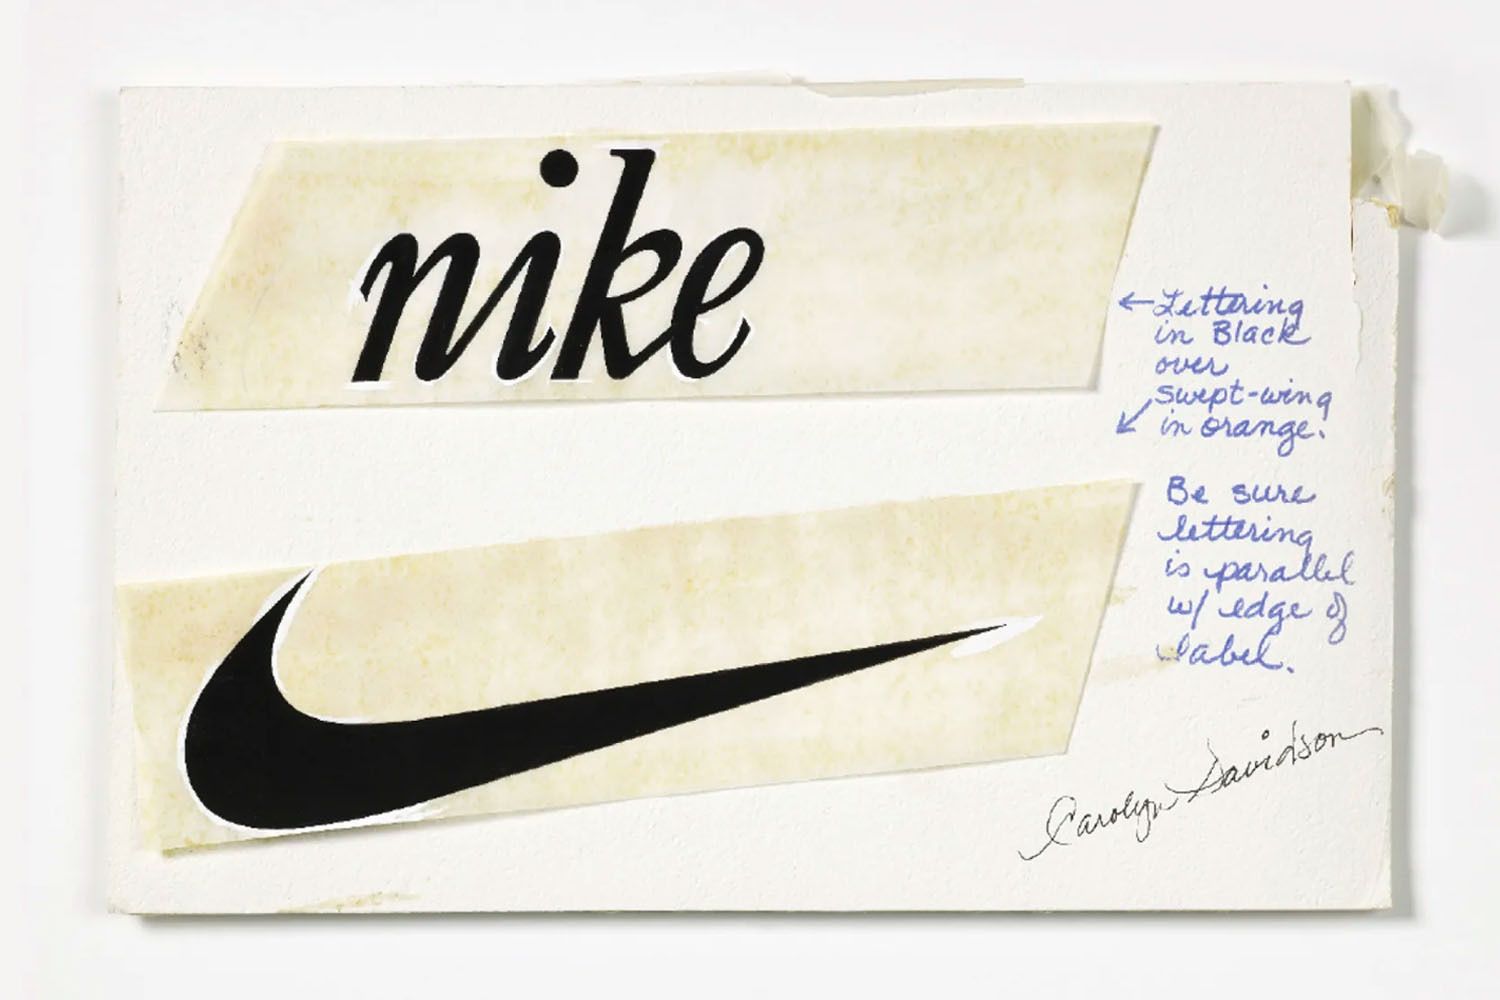 How Much Is The Nike Logo Worth? - Nike Branding In 2023